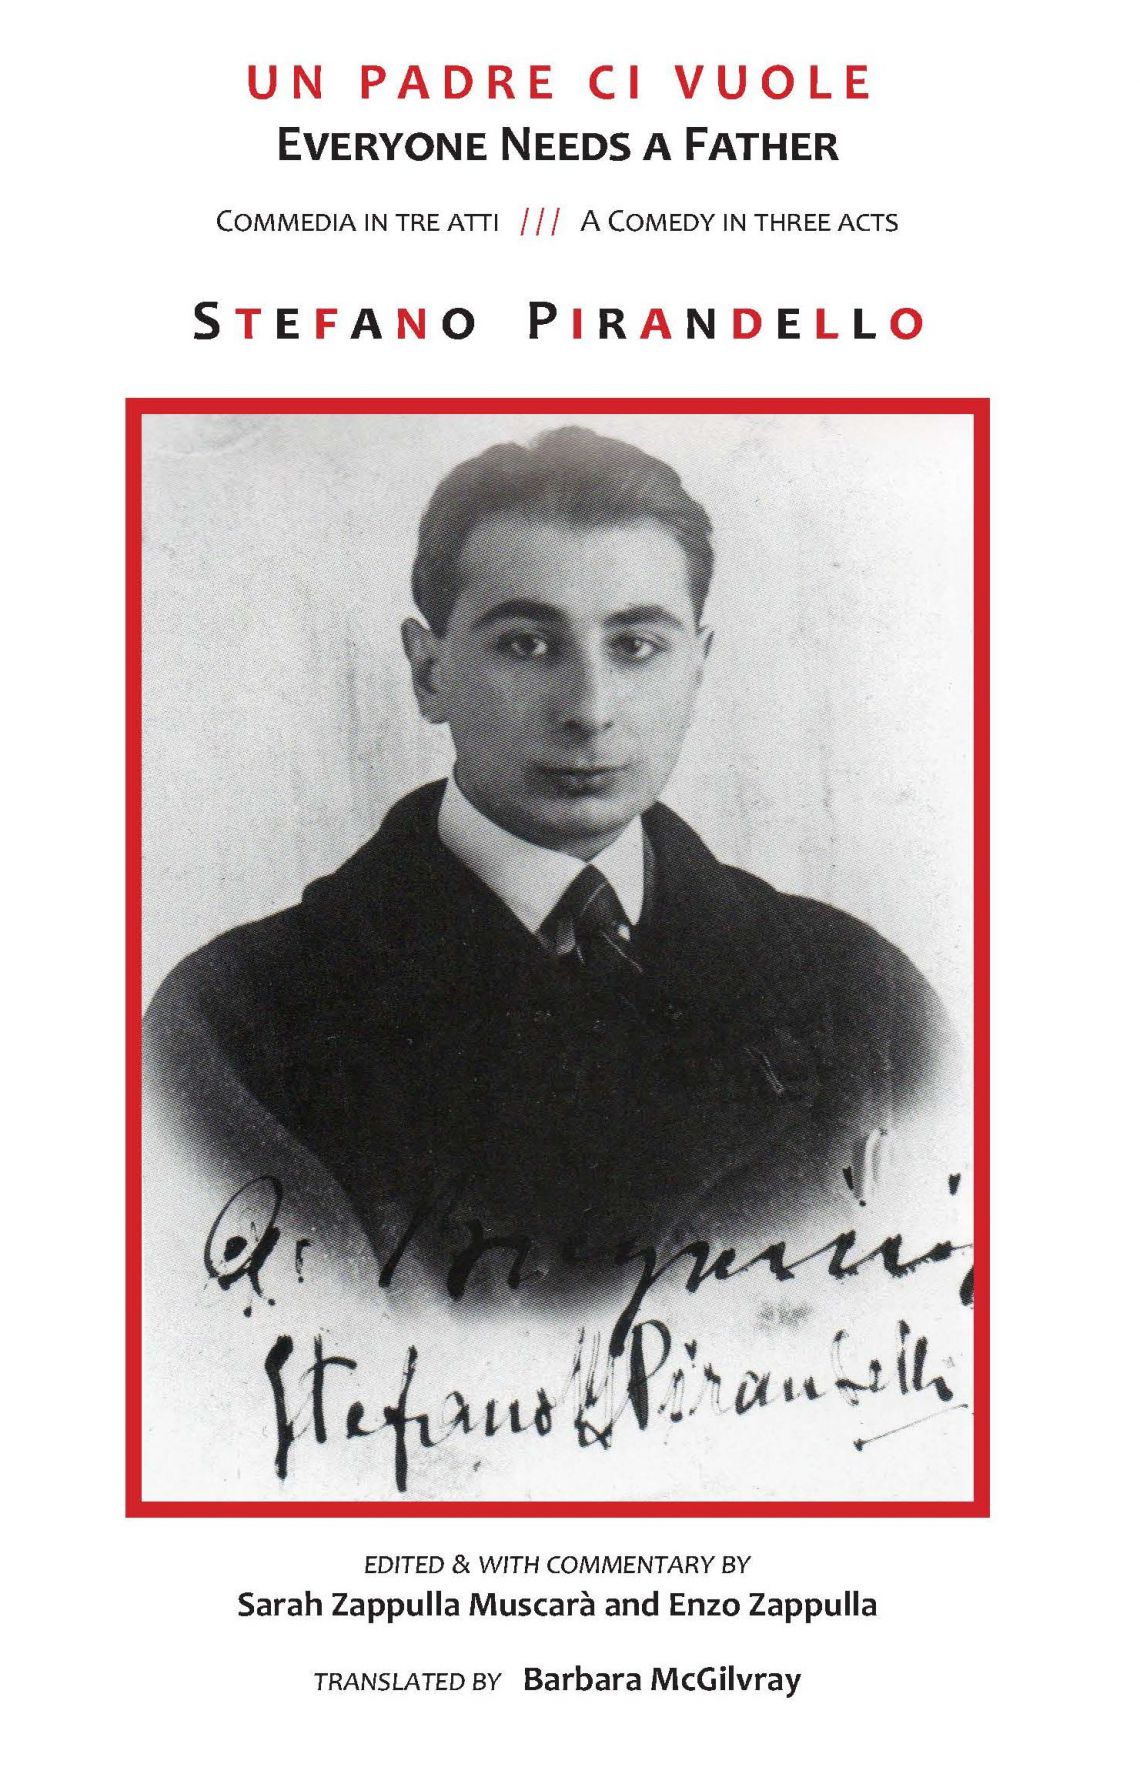 The cover of the English Translation of Everyone needs a father by Stefano Pirandello